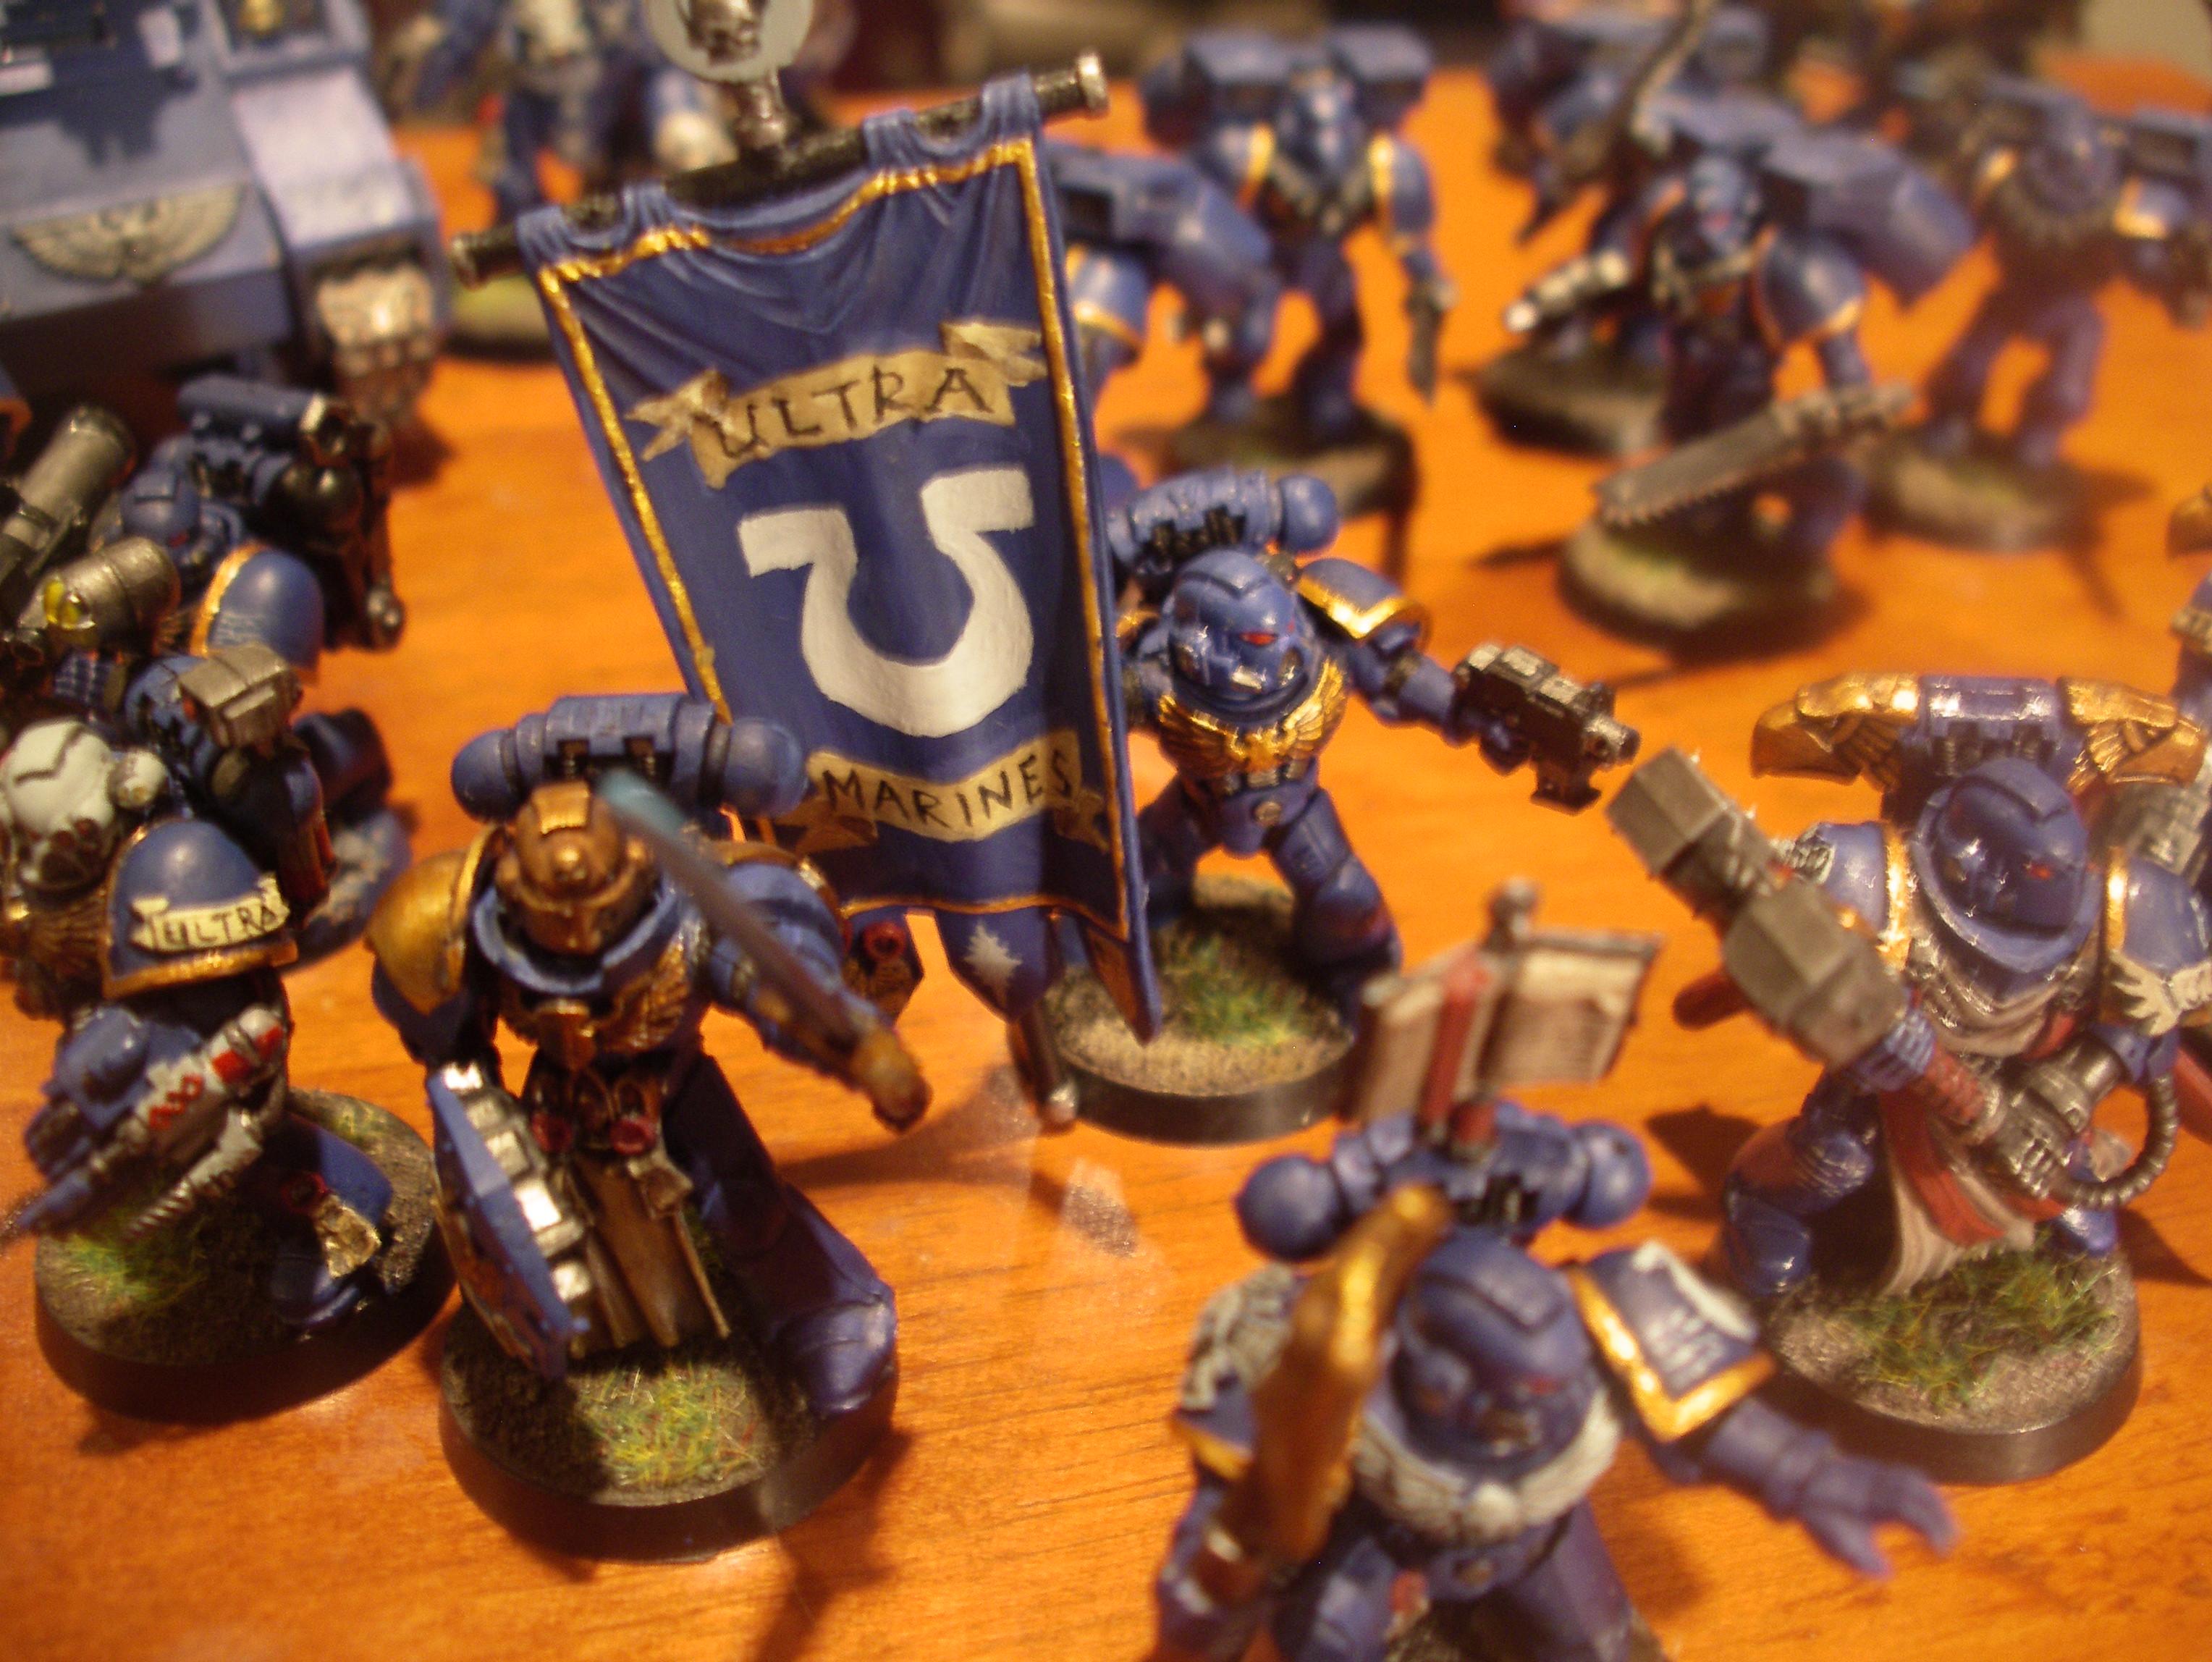 Army, Ultramarines, one of my older command squads